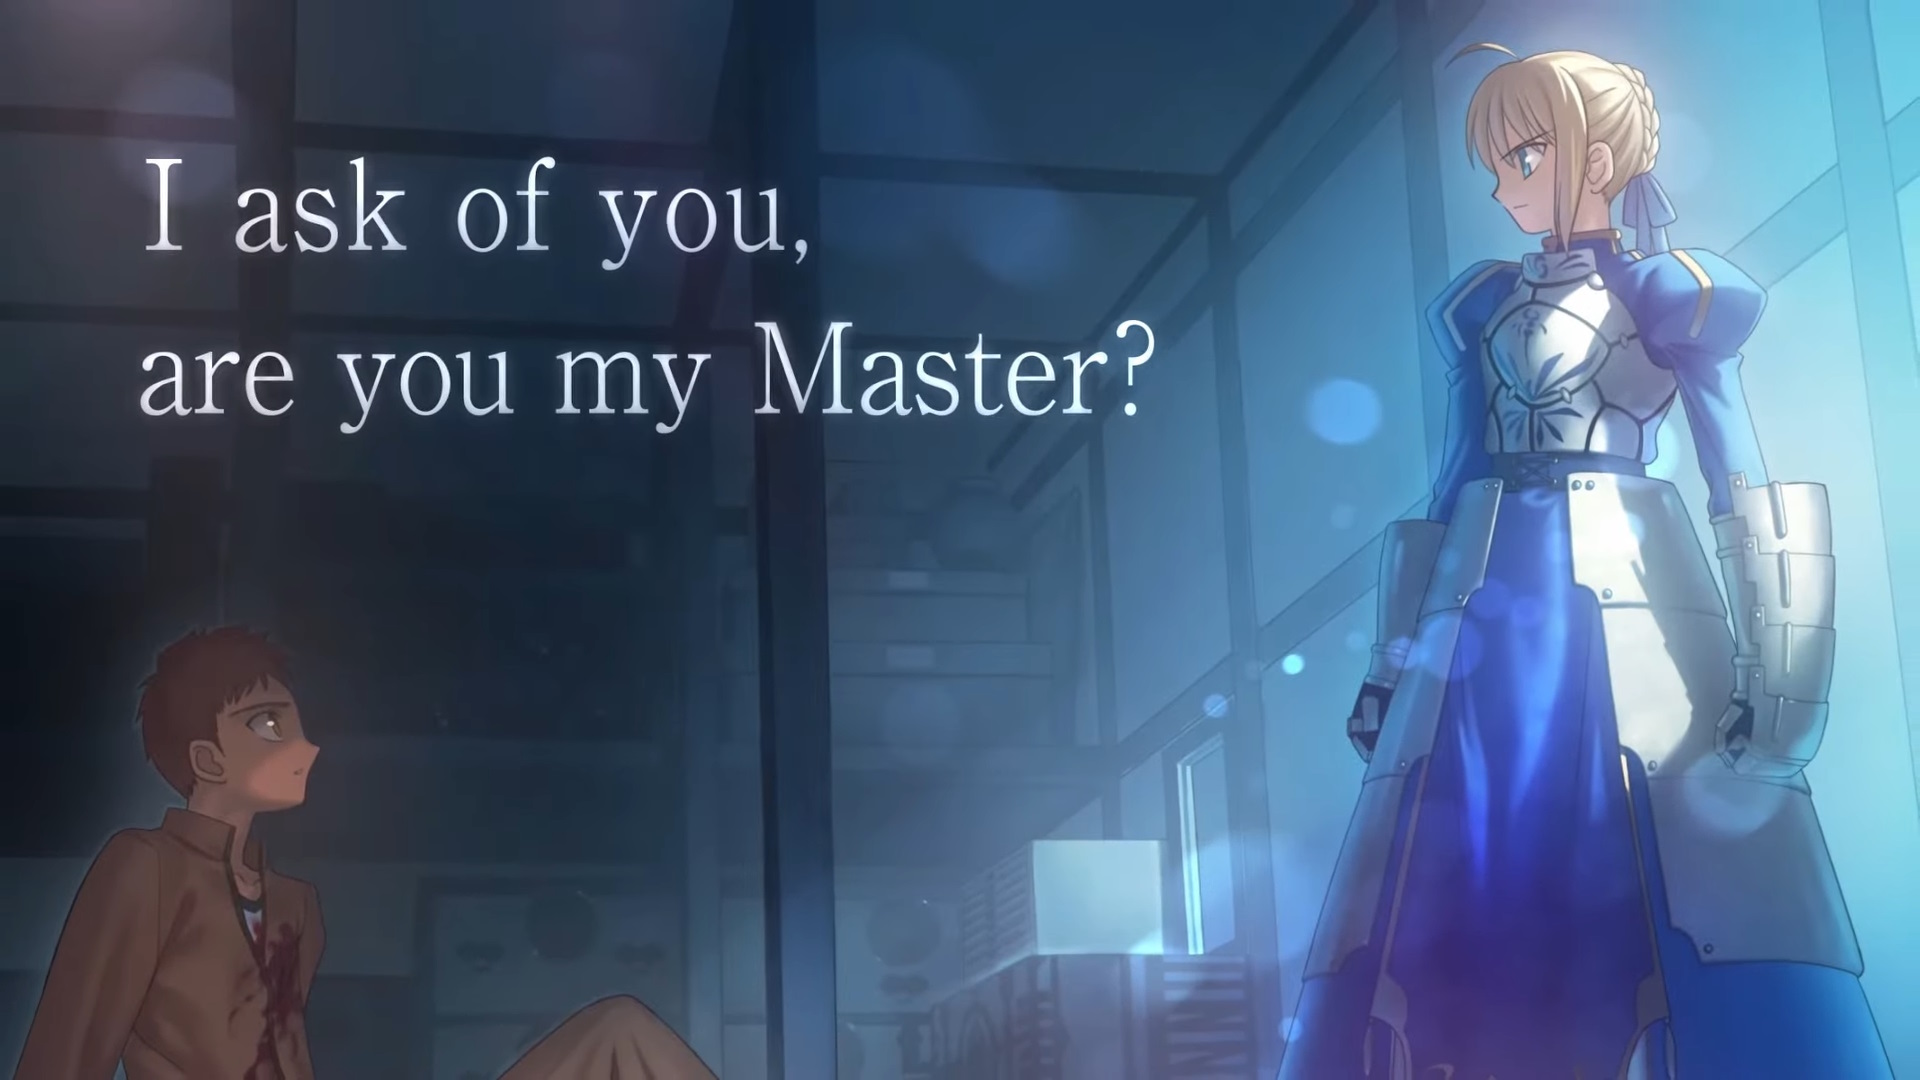 Shirou meeting Saber for the first time.